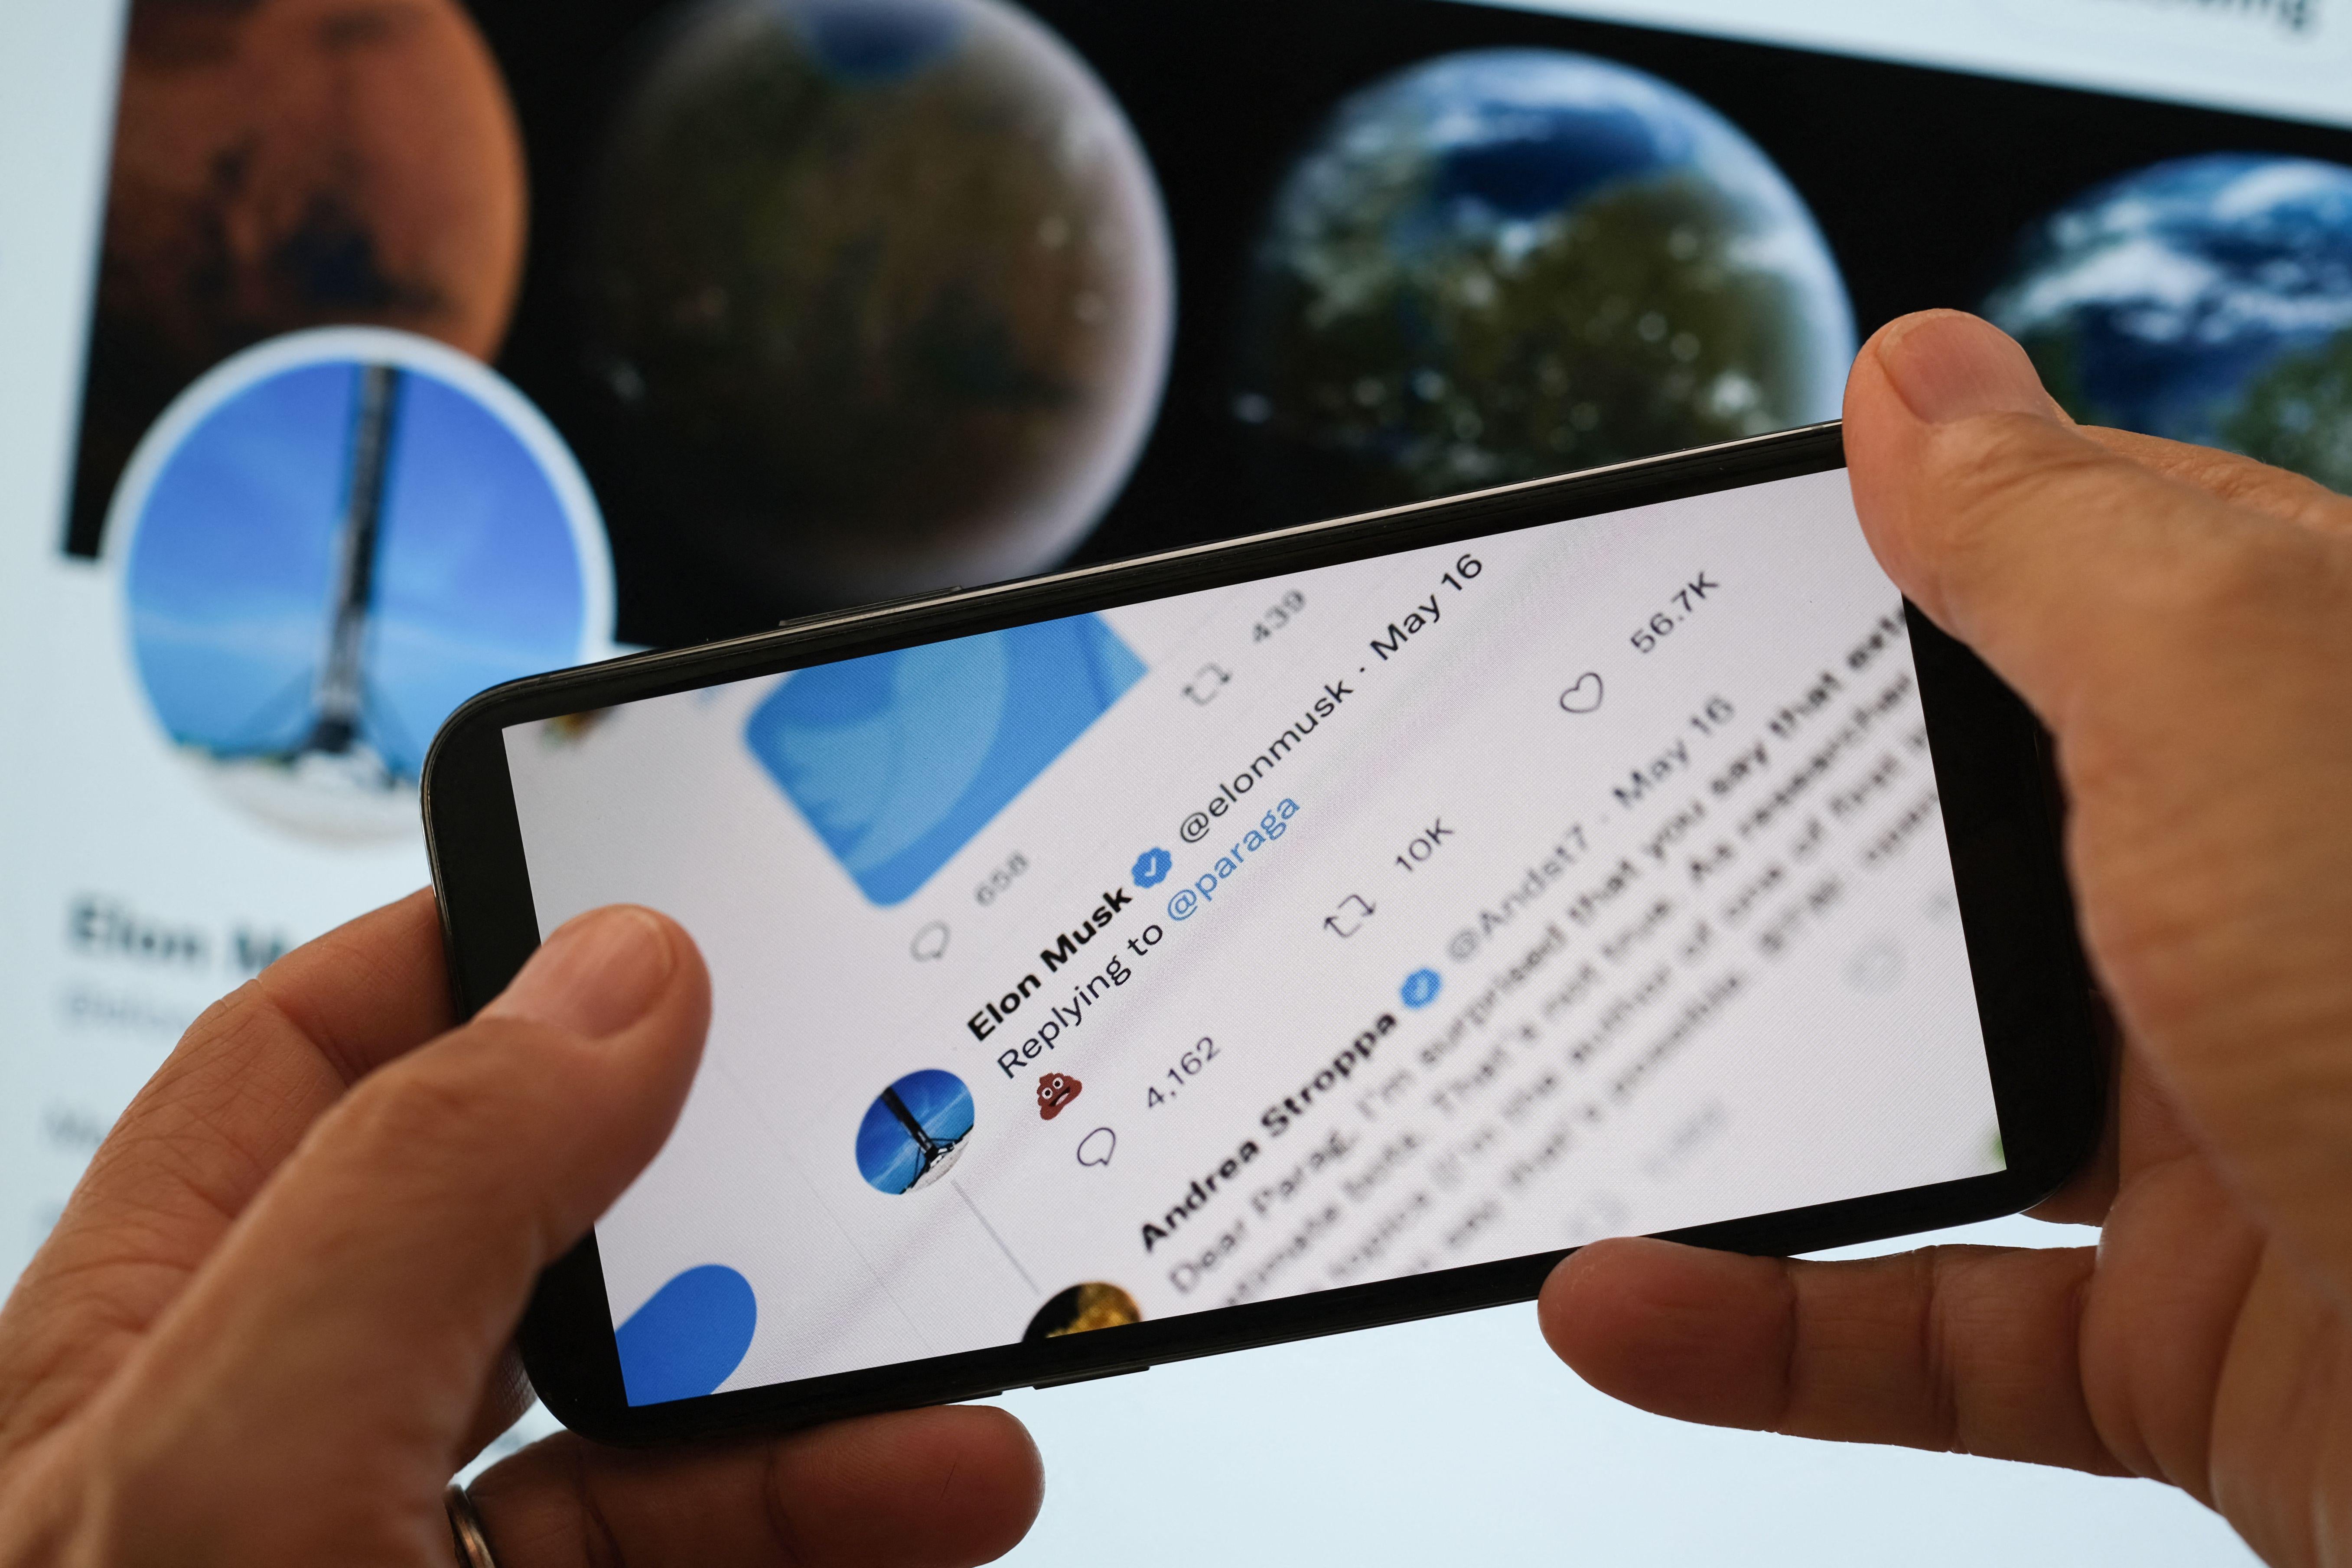 Hands holding a smartphone—which is displaying Elon Musk's tweet of a poop emoji in response to Twitter's CEO—in front of a larger screen displaying Musk's Twitter account.